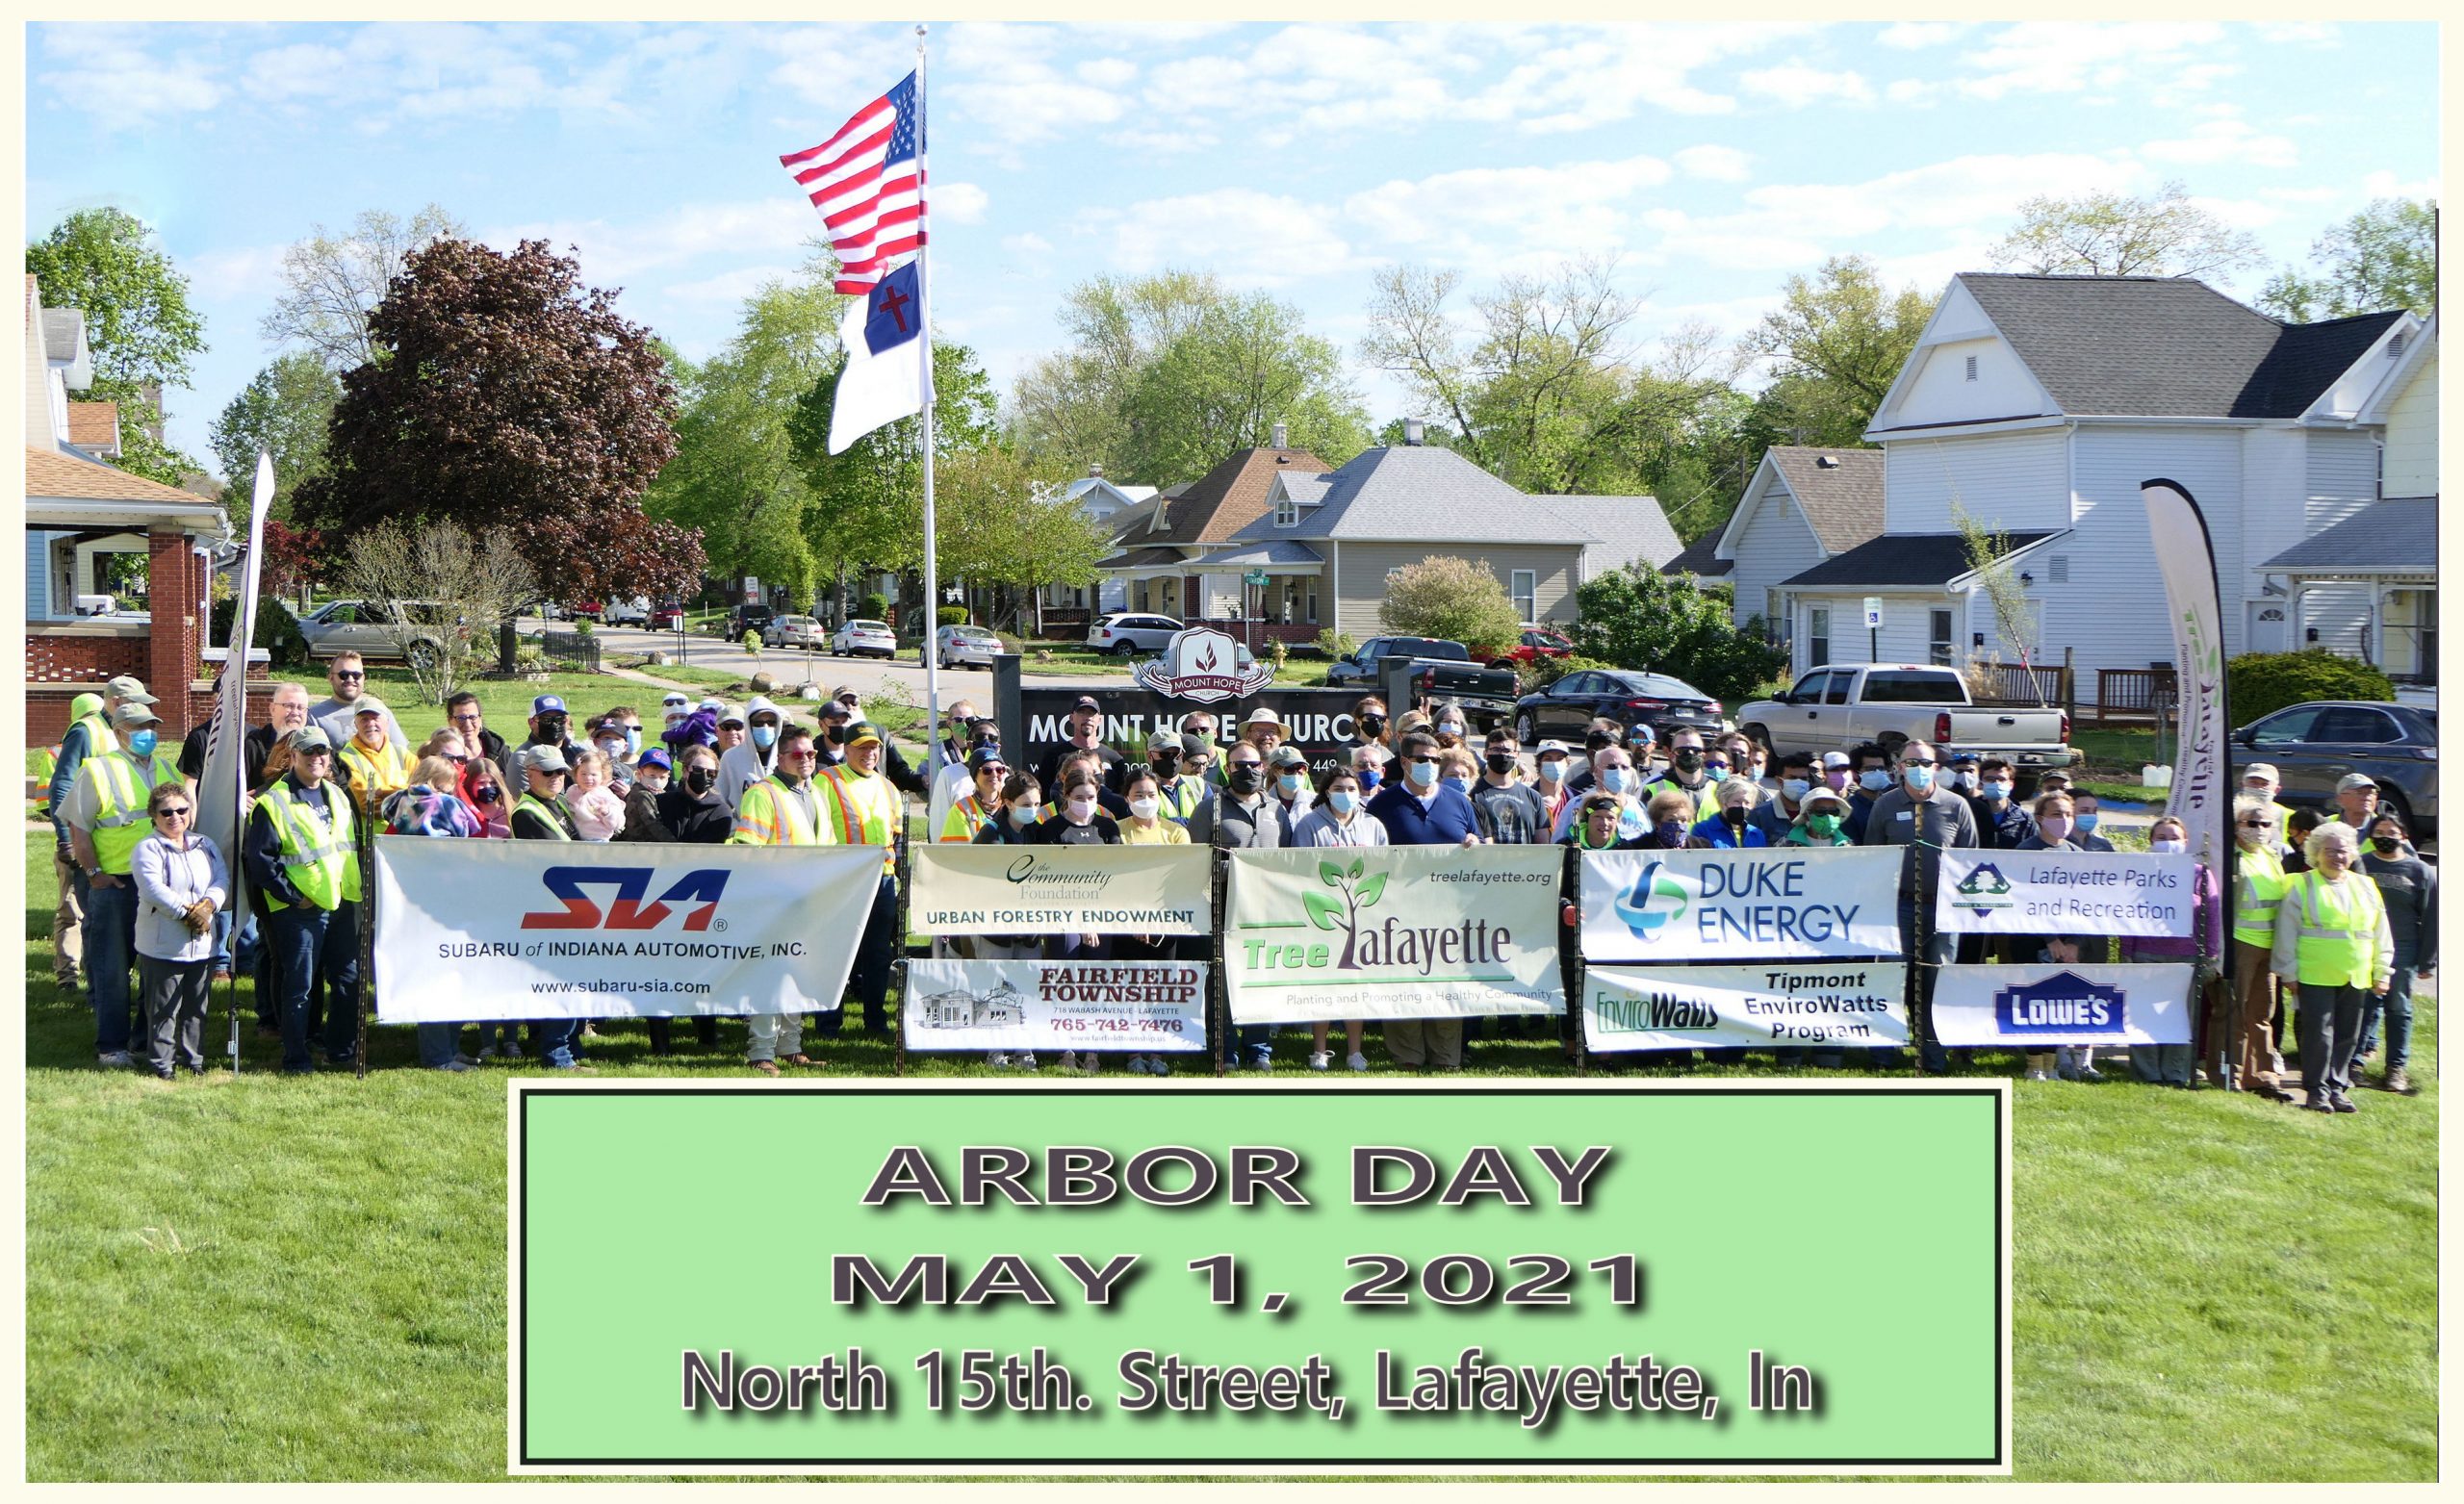 Tree Lafayette Arbor Day 2021 group picture